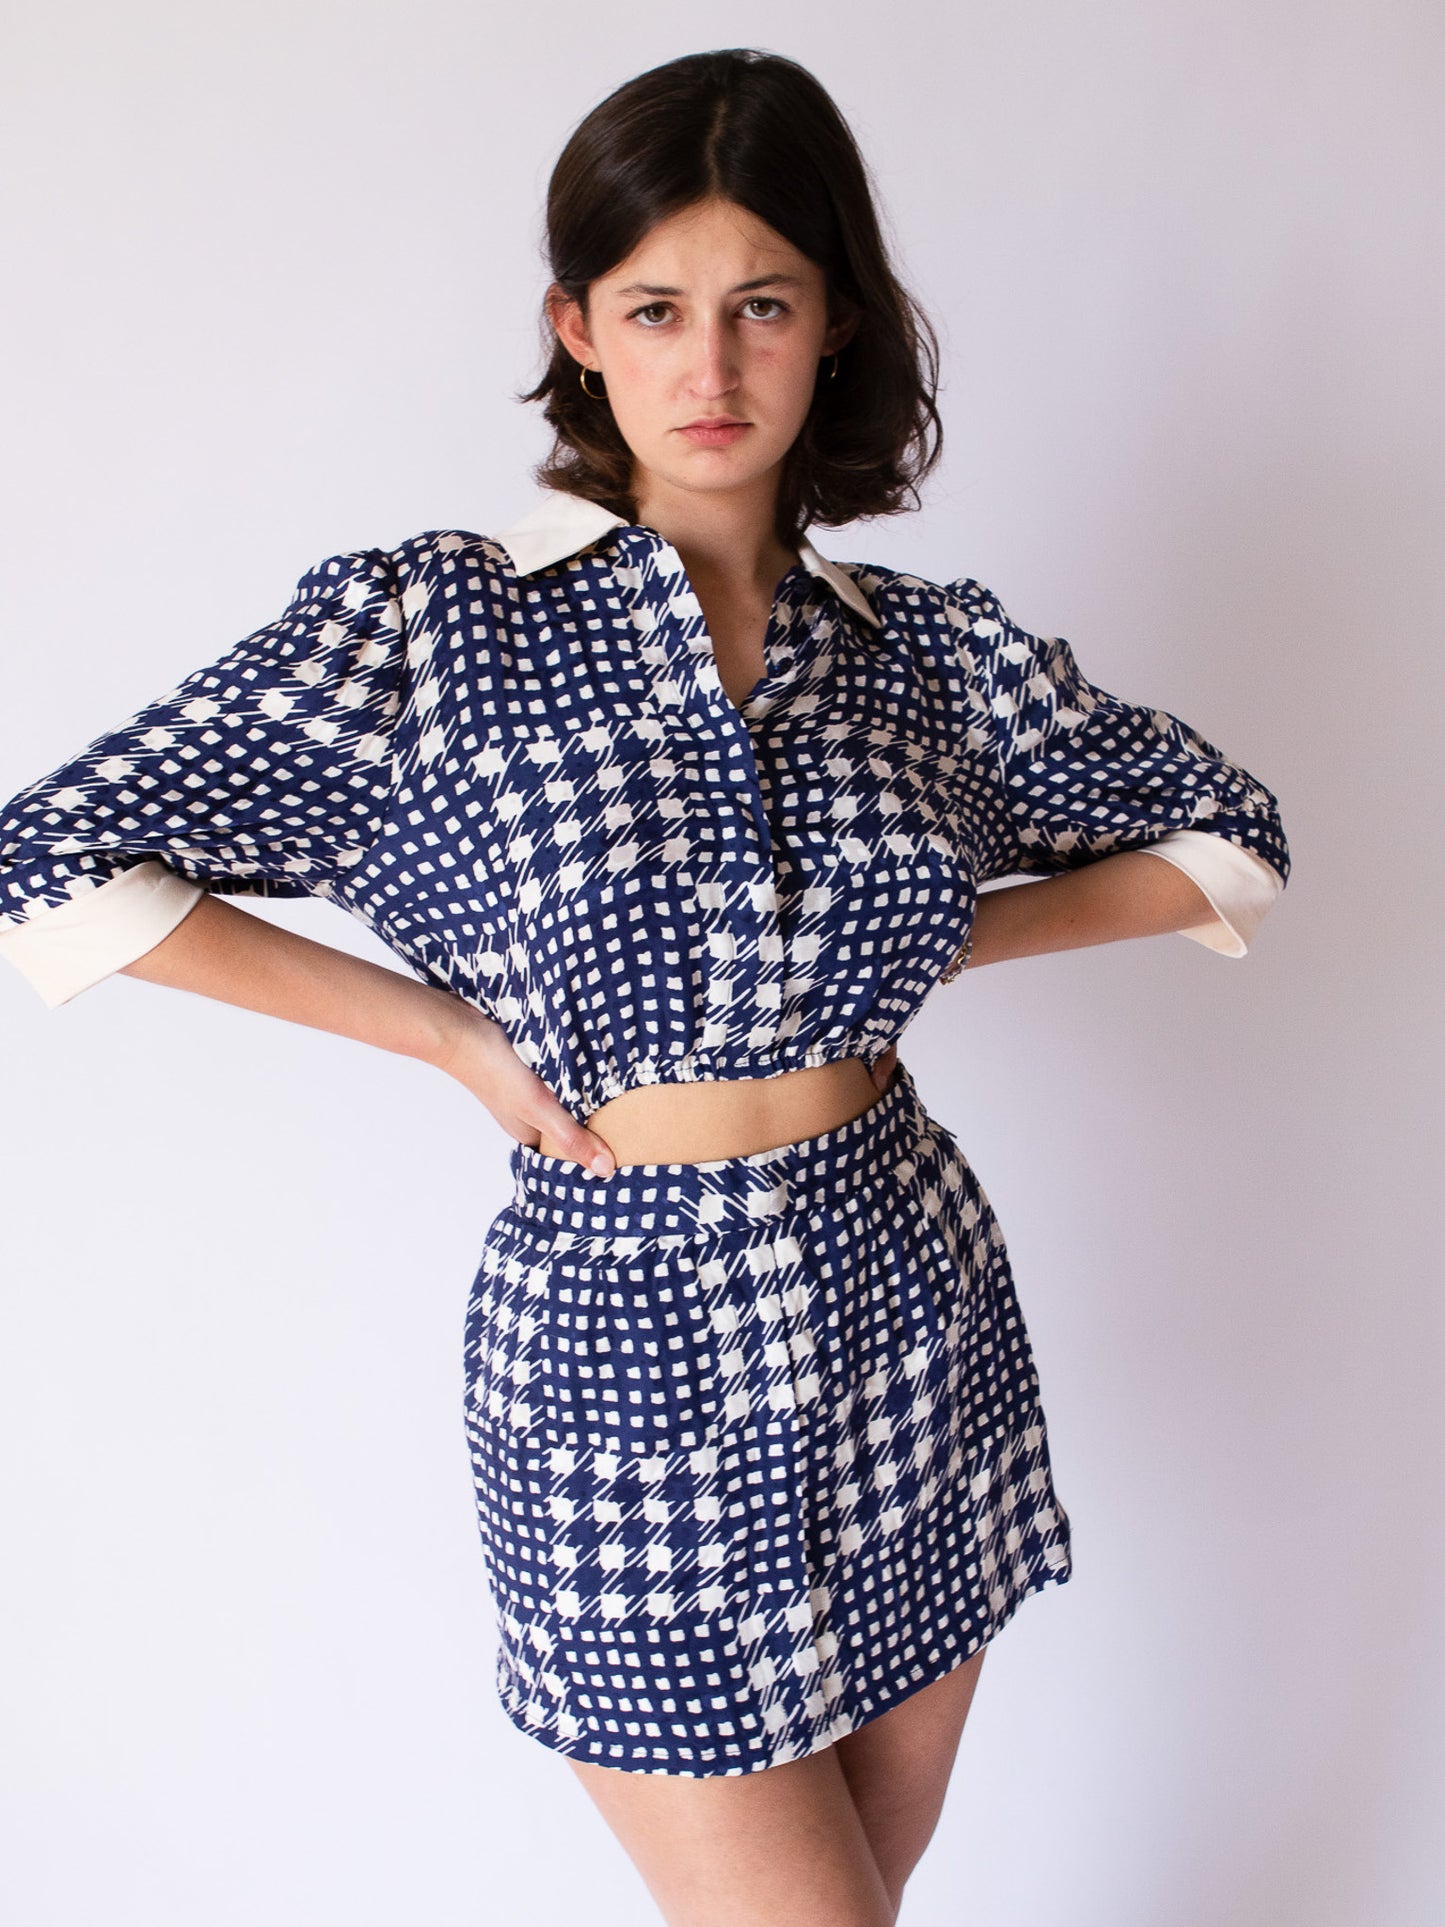 Giglio x Archetipo - 70's Cropped and Printed Shirt